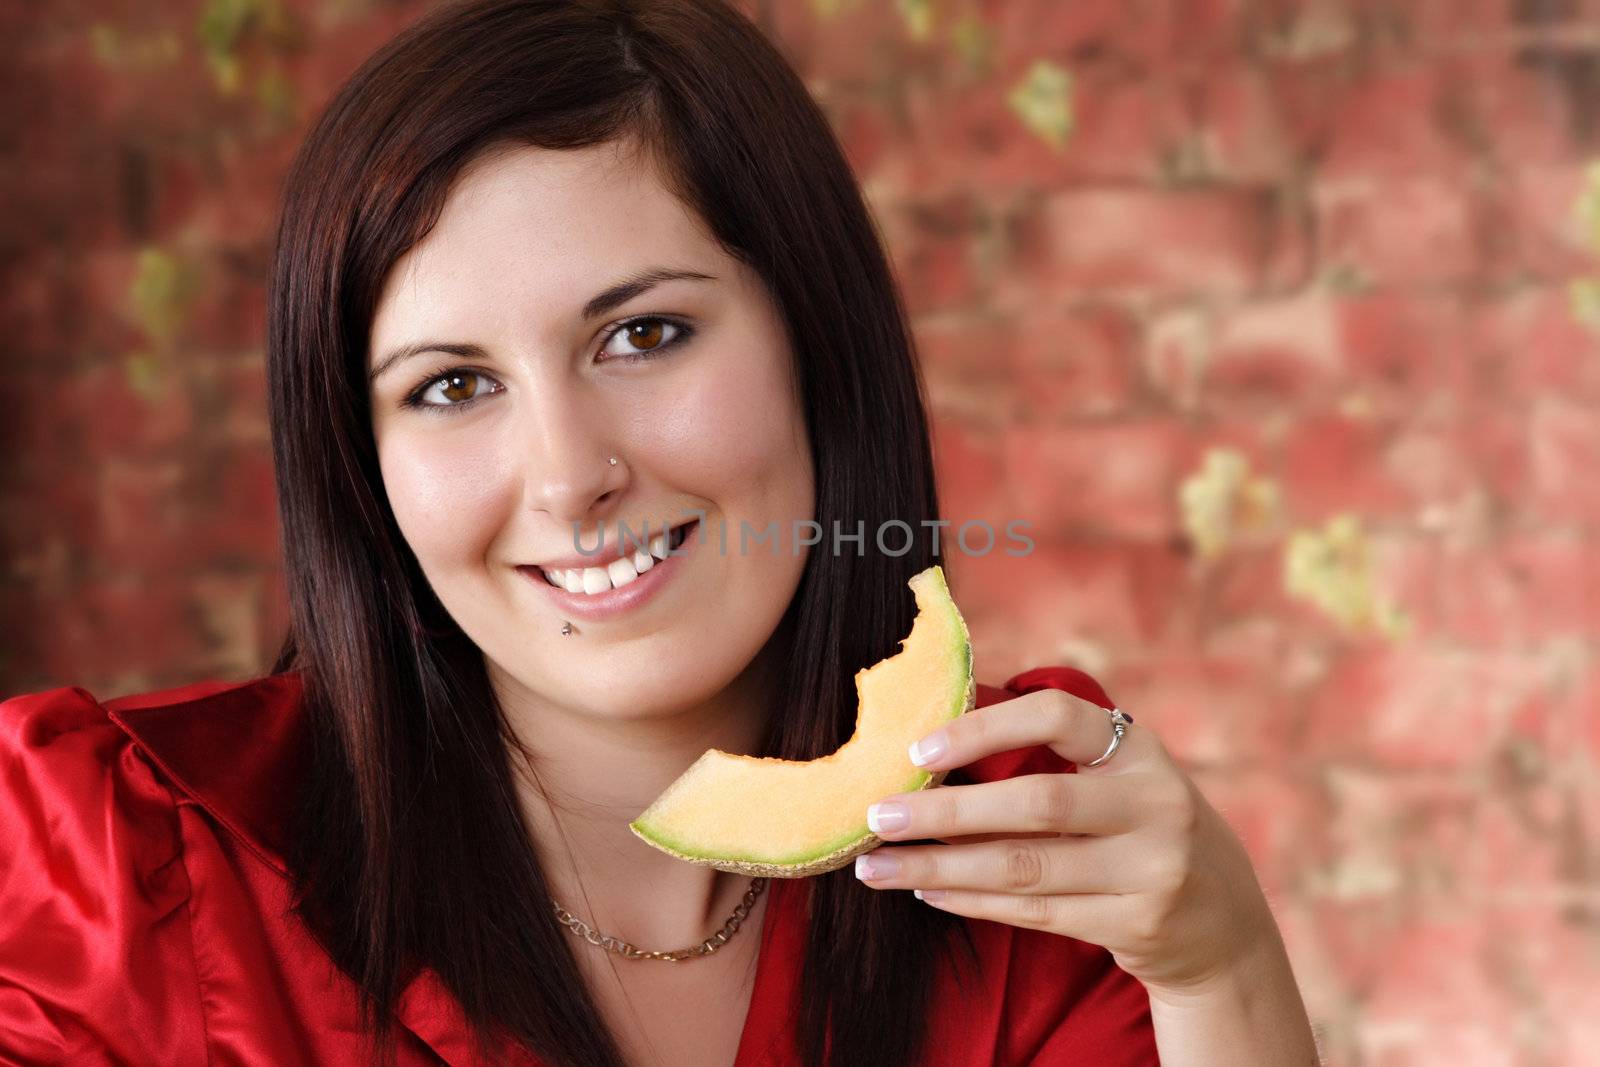 young beautiful woman eating a piece of cantaloup